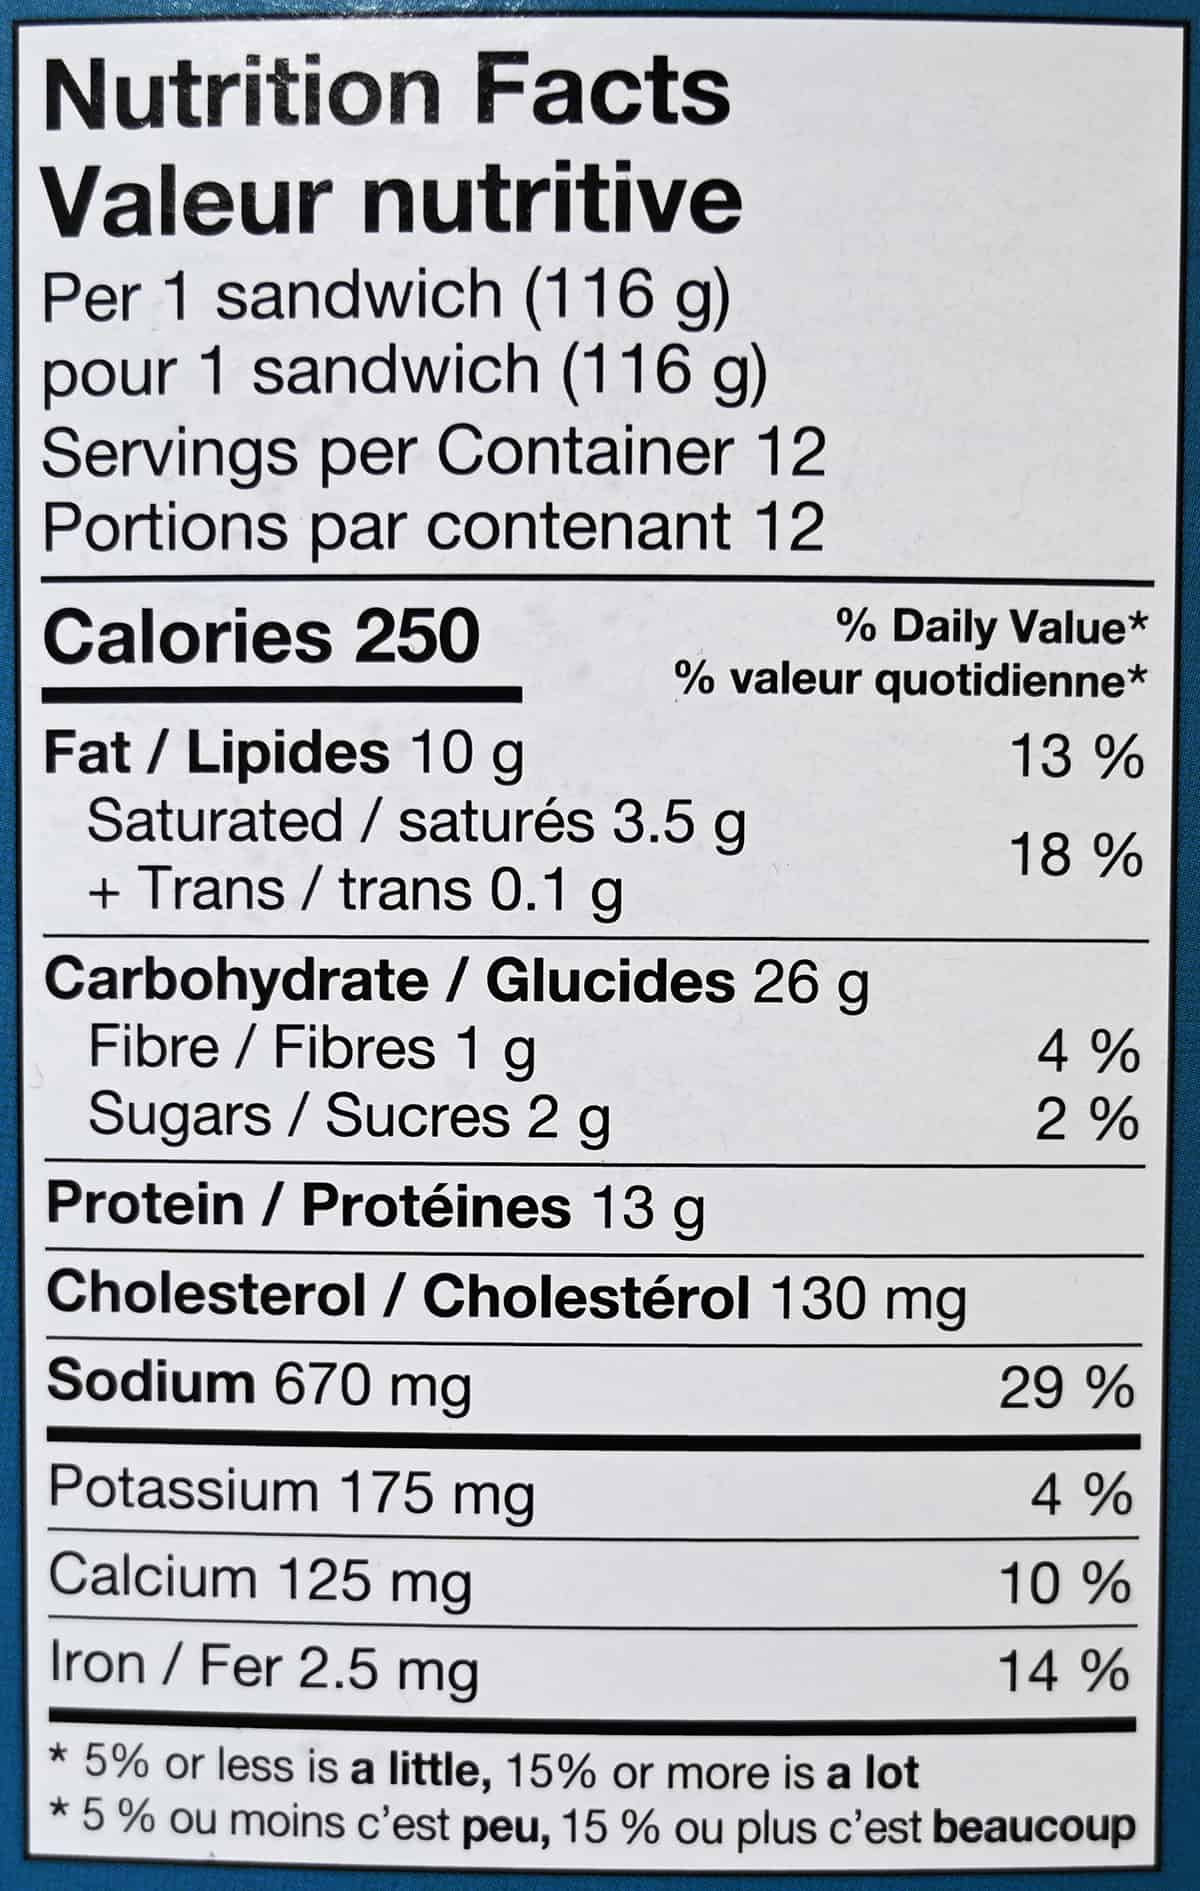 Image of the nutrition facts for the breakfast sandwiches from the back of the box.